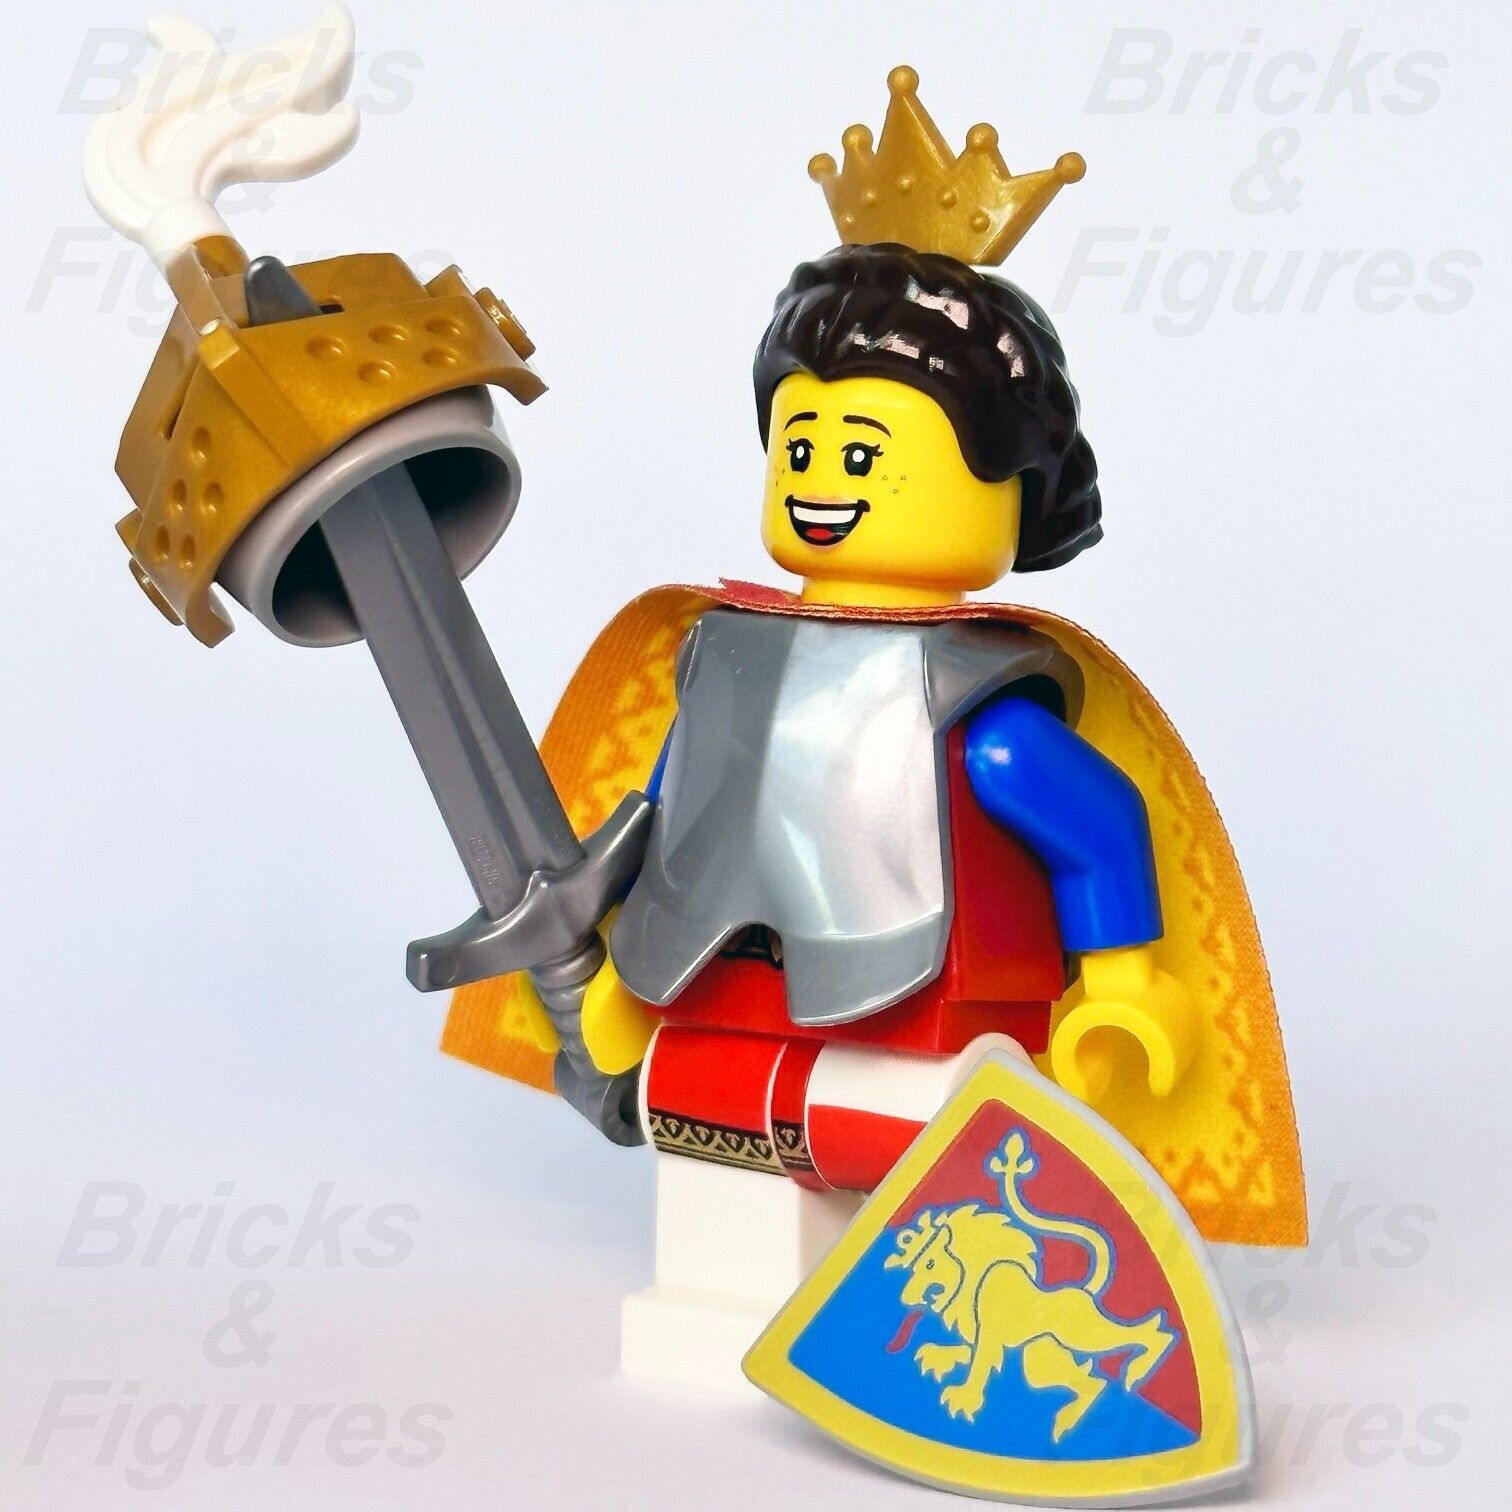 LEGO Lady of the Brave Lion Knights Castle Minifigure Queen Knight 10305 cas568 - Bricks & Figures